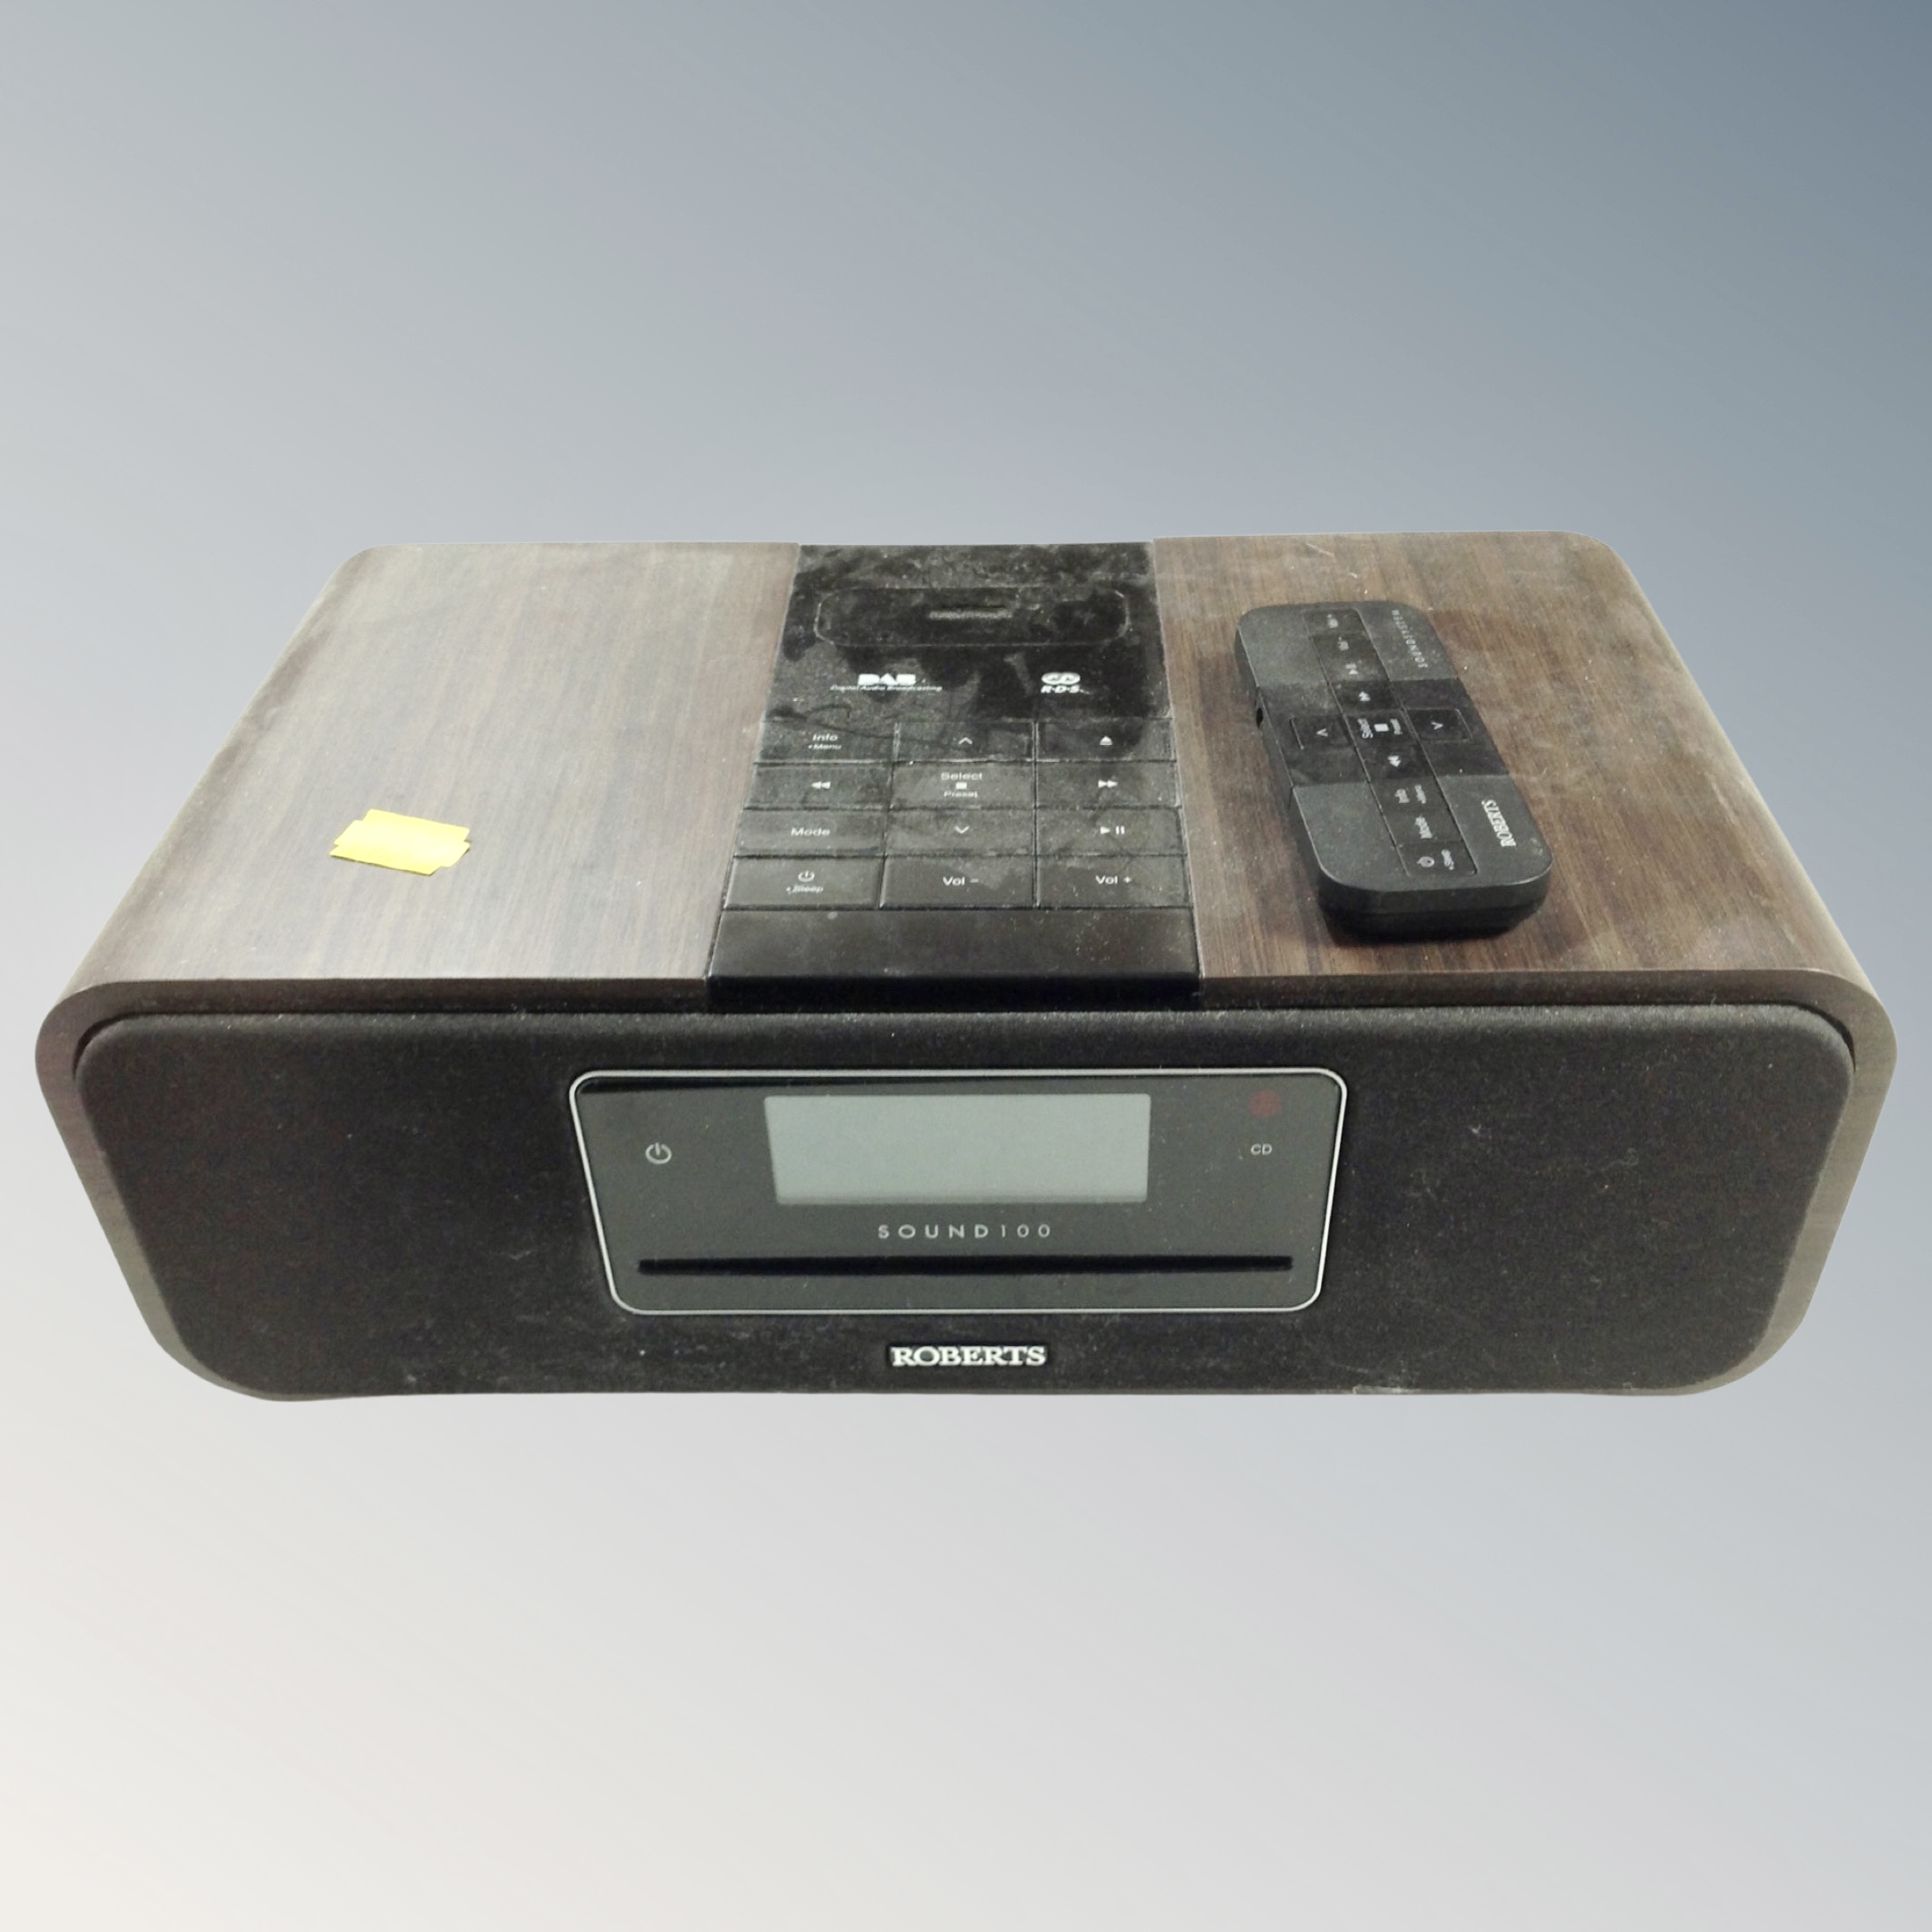 A Roberts Sound 100 DAB radio with remote